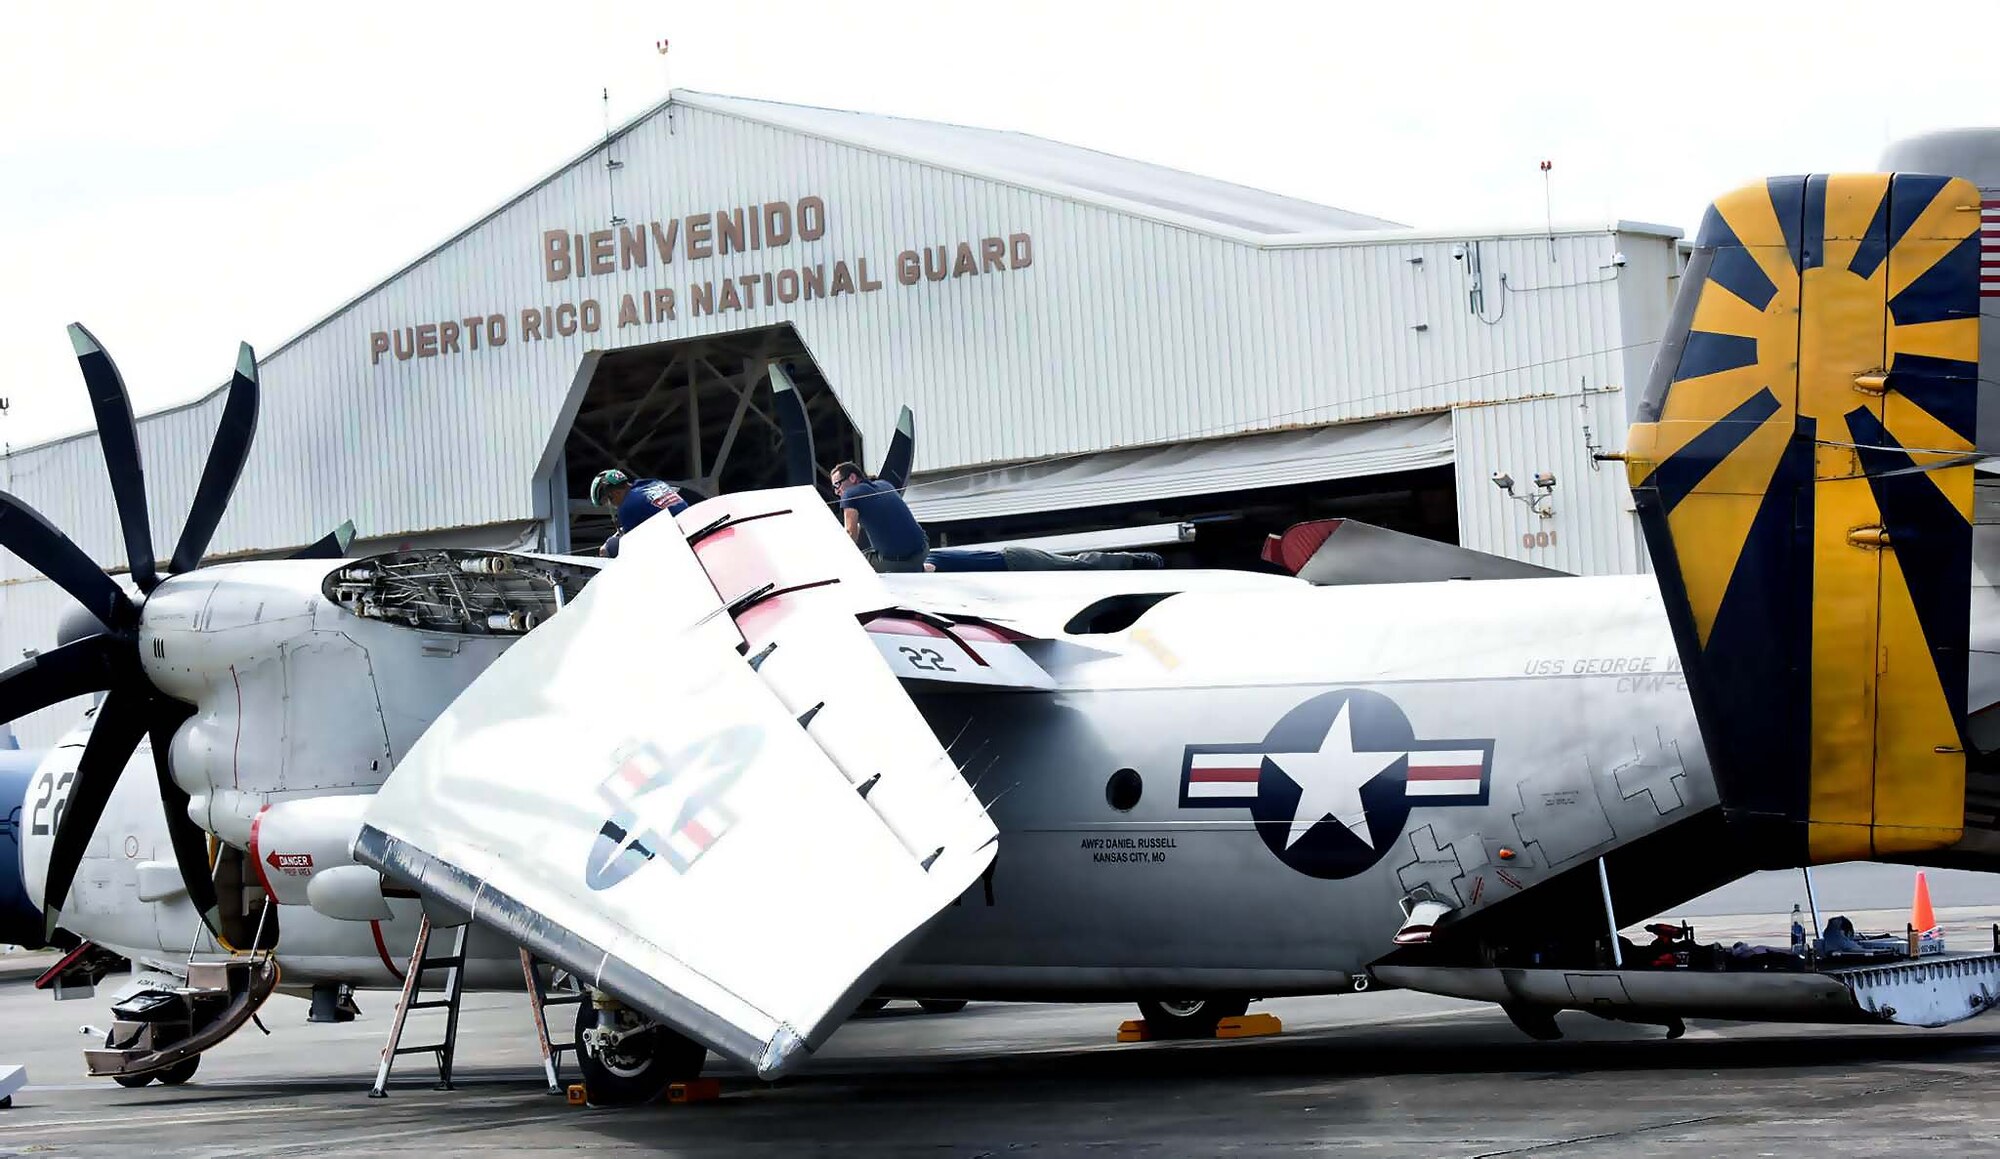 The 156th Airlift Wing, provides logistical and maintenance support to the Navy on Puerto Rico Air National Guard Base Muñiz during the week of Dec 5 thru 11, 2015. Two Navy C-2 cargo planes flew in from the USS George Washington Aircraft Carrier to drop off navy personnel, and pick up pre-ordered supplies and equipment for the vessel. The mission is to provide logistical support for the vessel’s journey from San Diego, California to South America, ending its last leg in Norfolk, Virginia. (U.S. Air National Guard photo by Tech Sgt. Efrain Sanchez)
